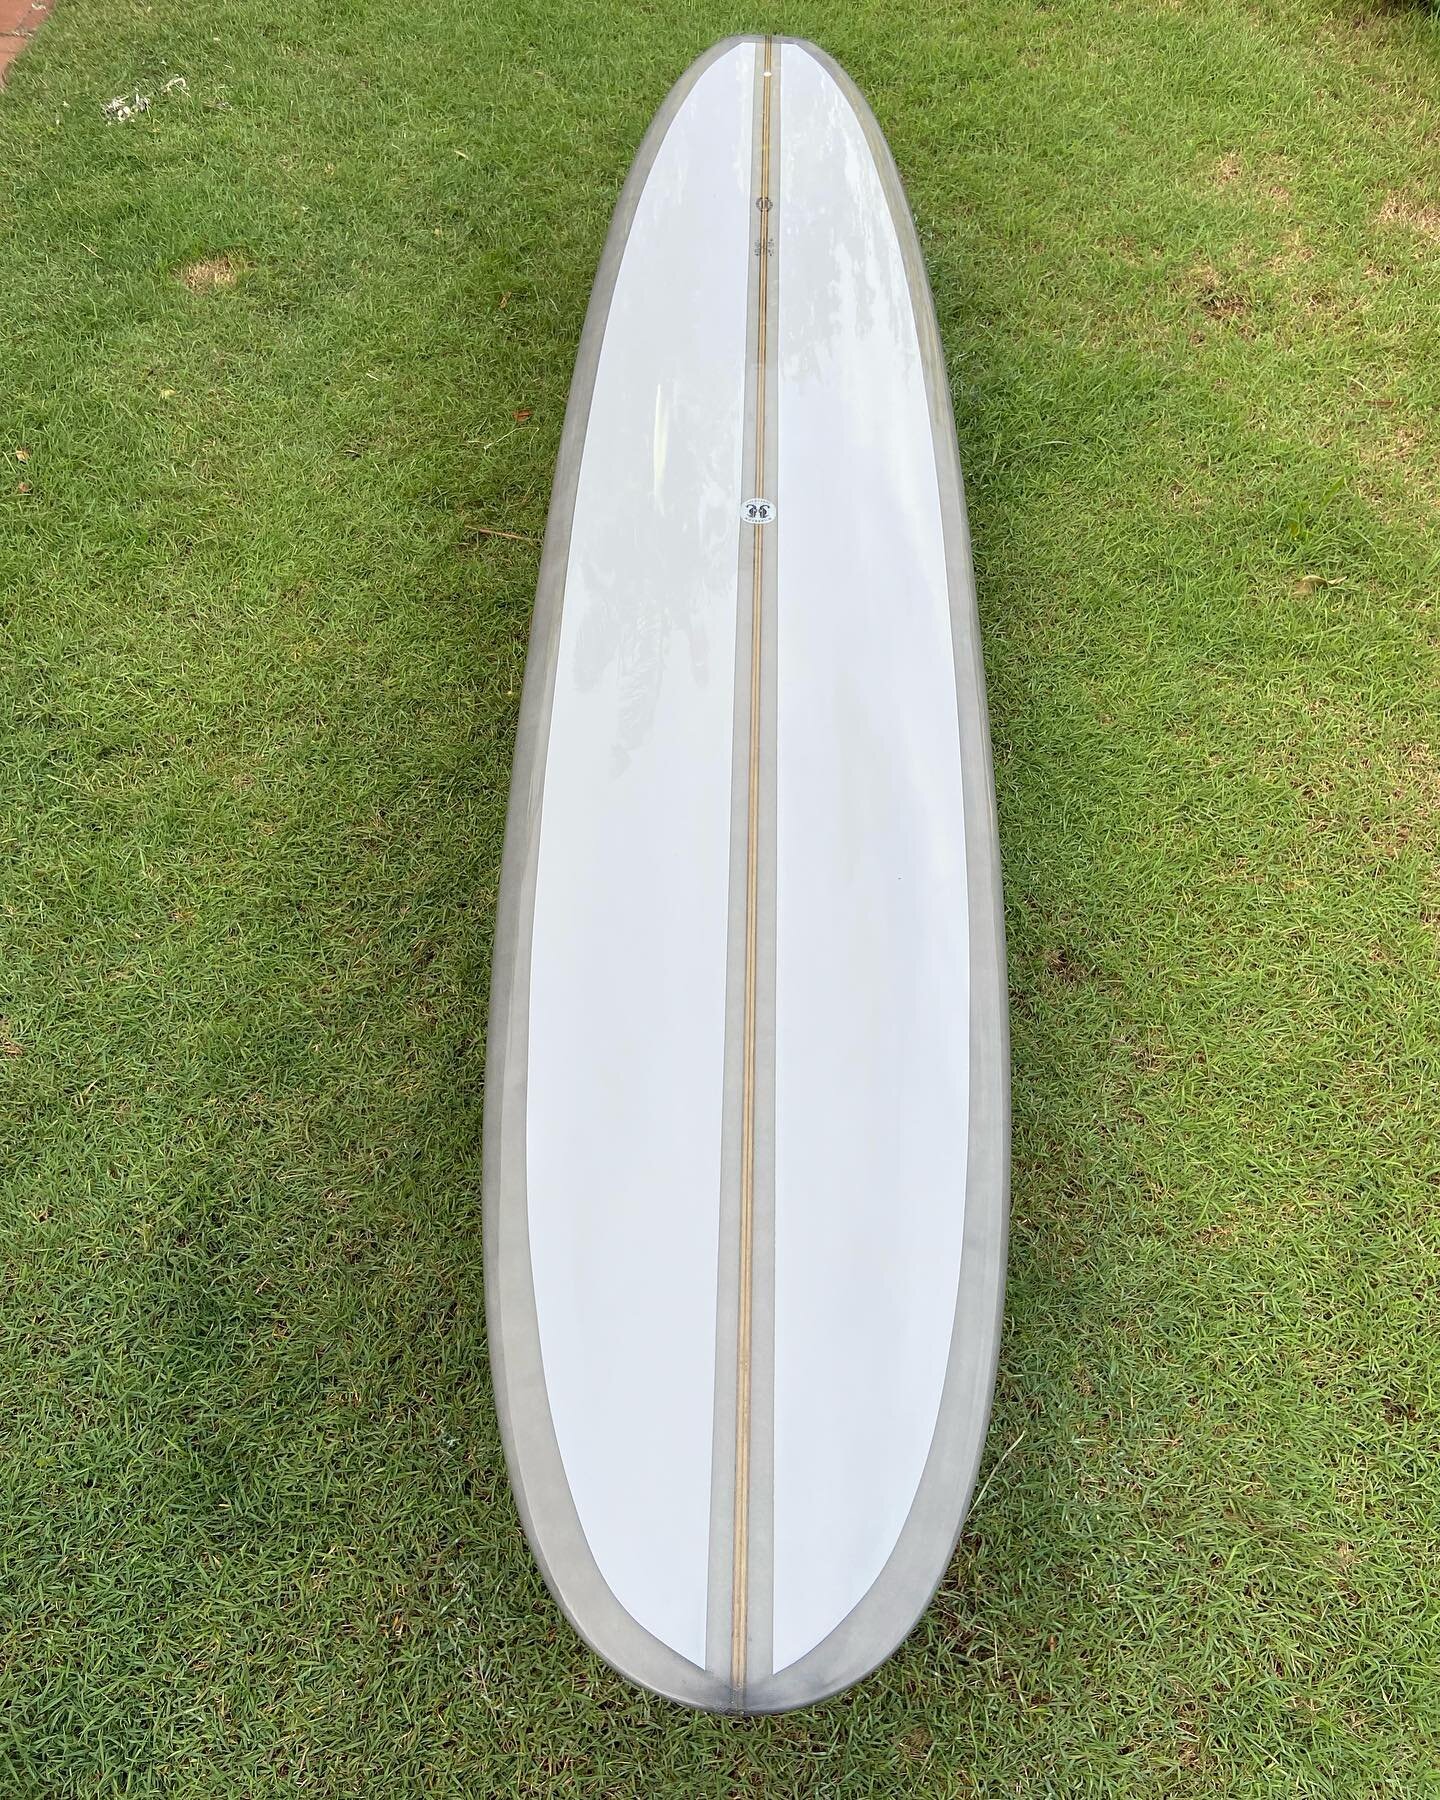 9&rsquo;2&rdquo; &bull; 22 &frac12; &bull; 2 13/16 &bull; impala &bull; heading to @sunburntmess.surf in Bondi.  This board features a clean semi-pig outline, nice curve below 12&rdquo; going into a squash tail, balance rocker, single nose concave sp